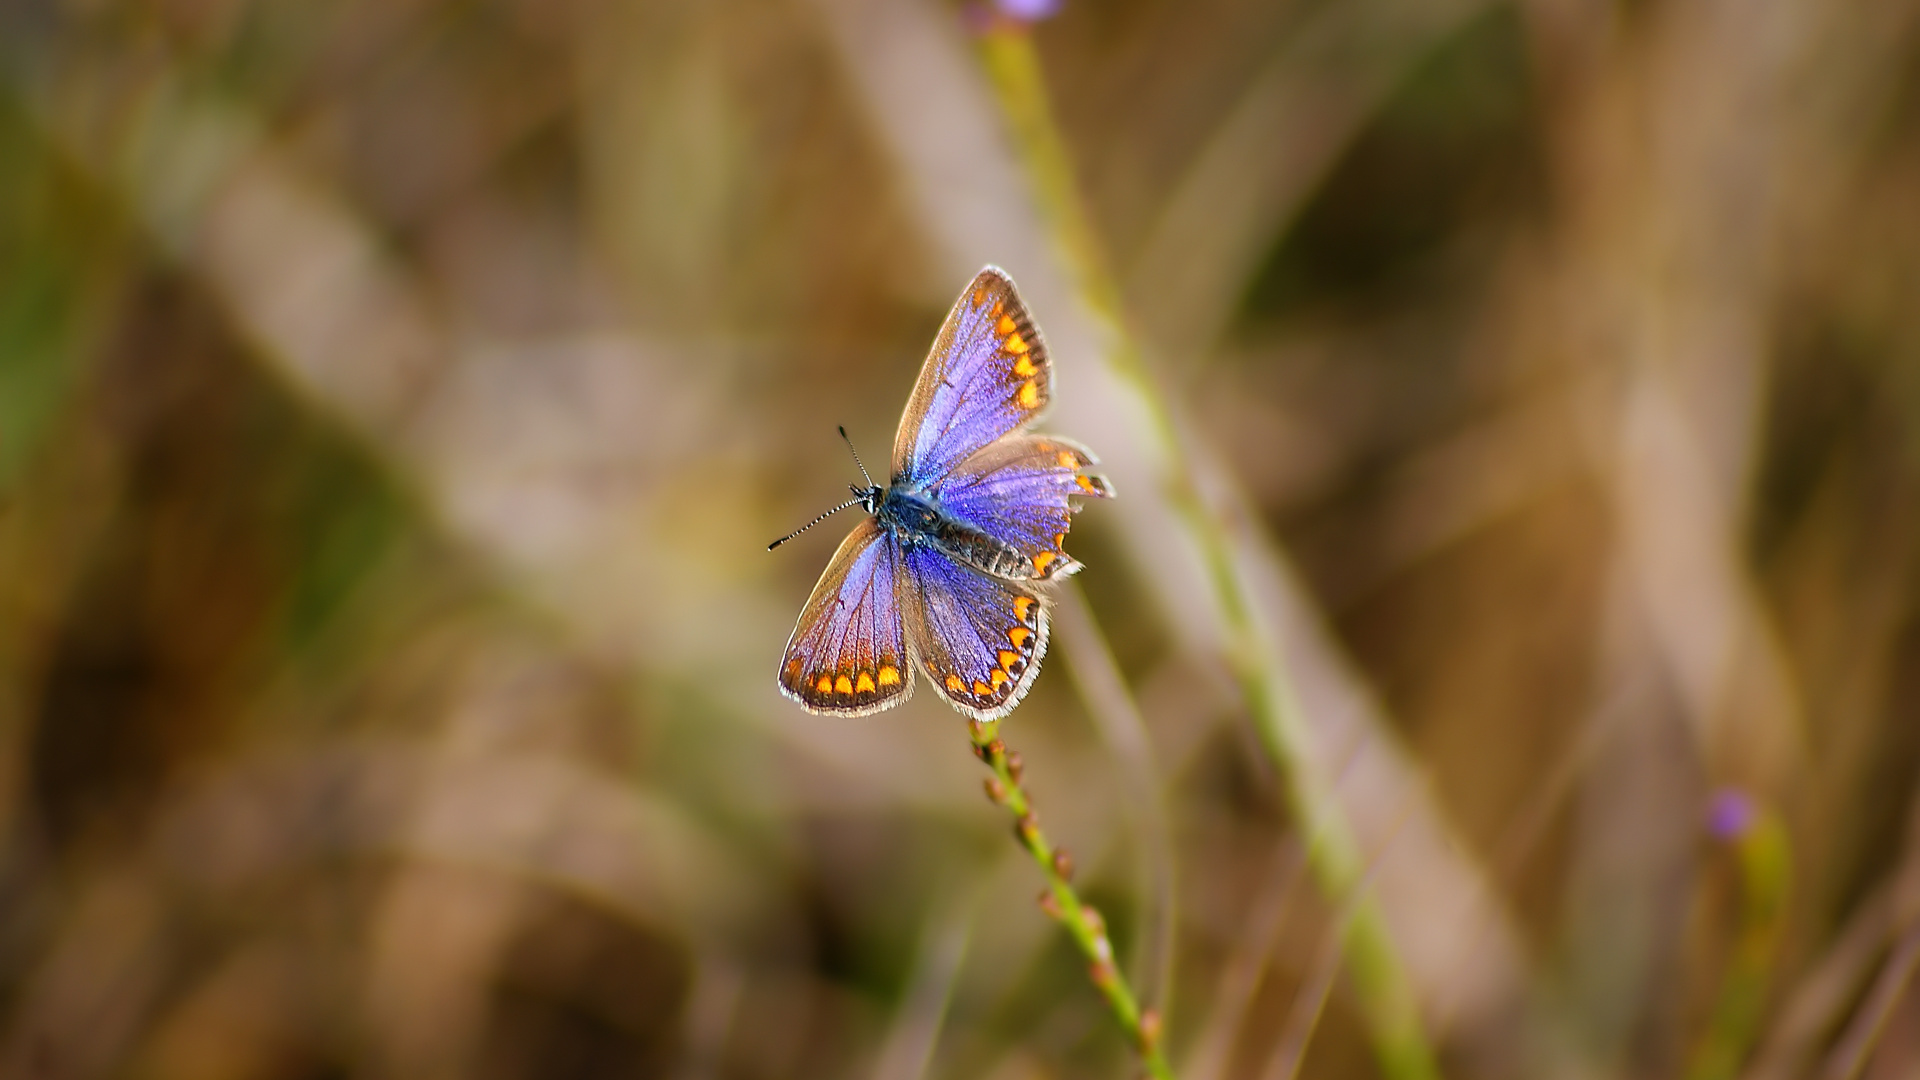 Blue and Brown Butterfly on Green Plant. Wallpaper in 1920x1080 Resolution